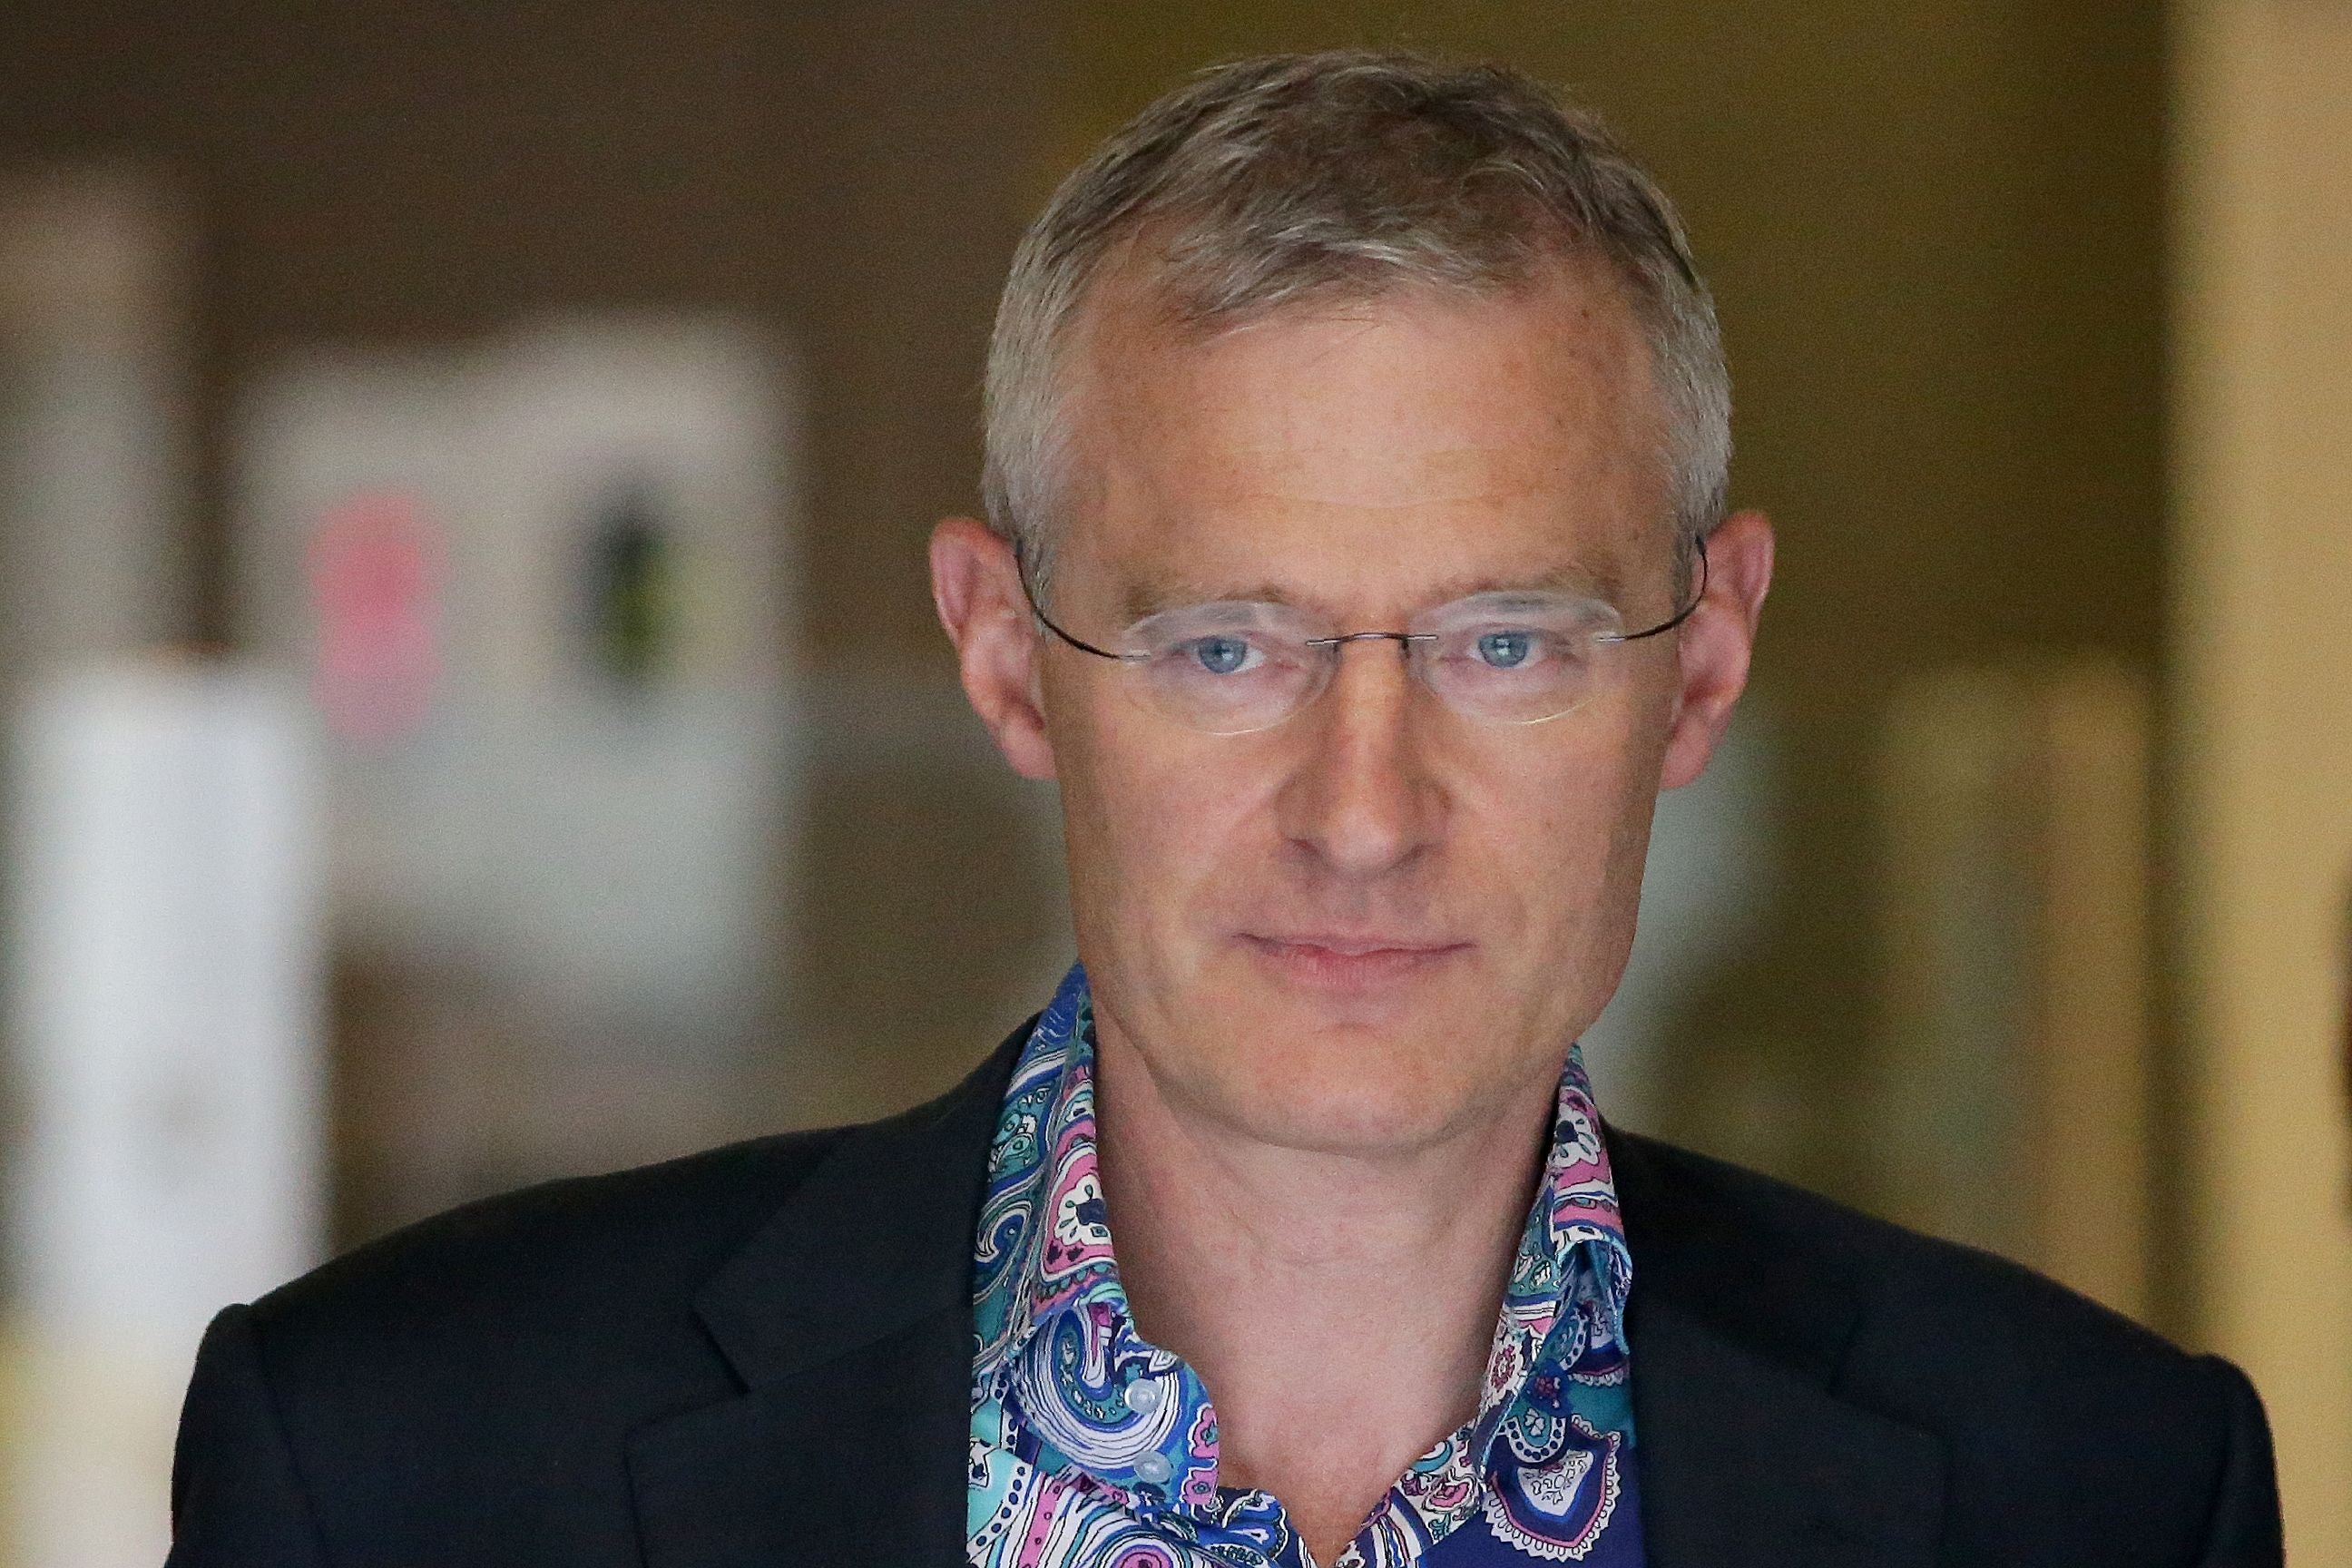 Jeremy Vine was “unnerved” by the stunt, which saw his wife filmed as she answered the door